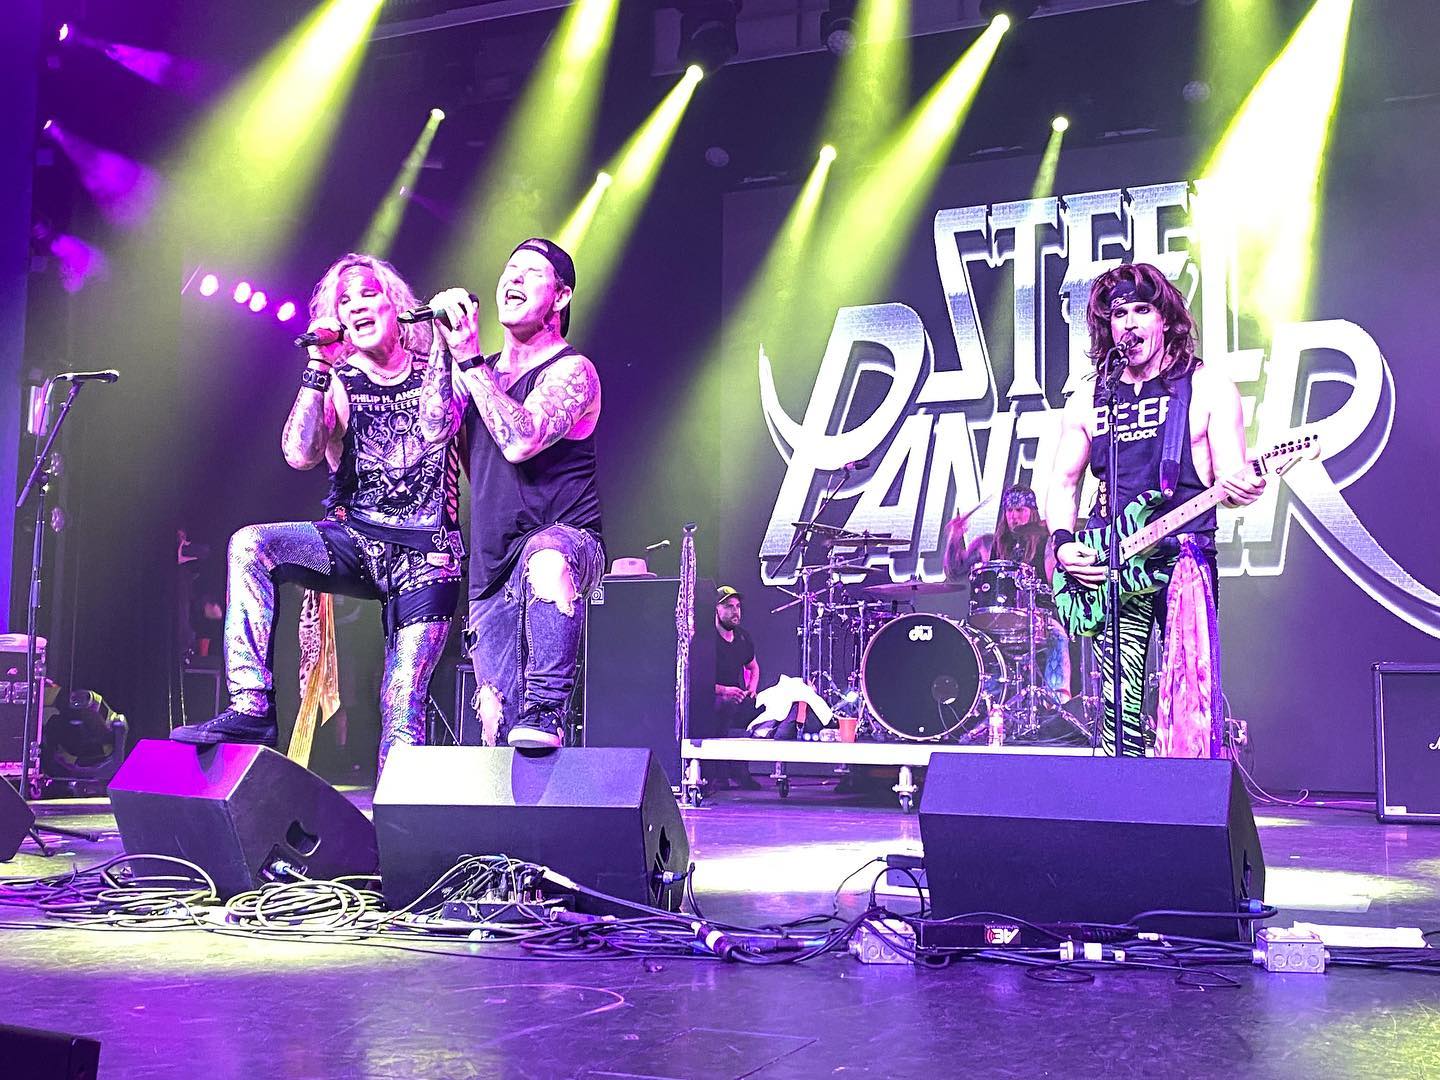 Watch Corey Taylor join Steel Panther to pay tribute to Dio with a performance of "Rainbow In the Dark"